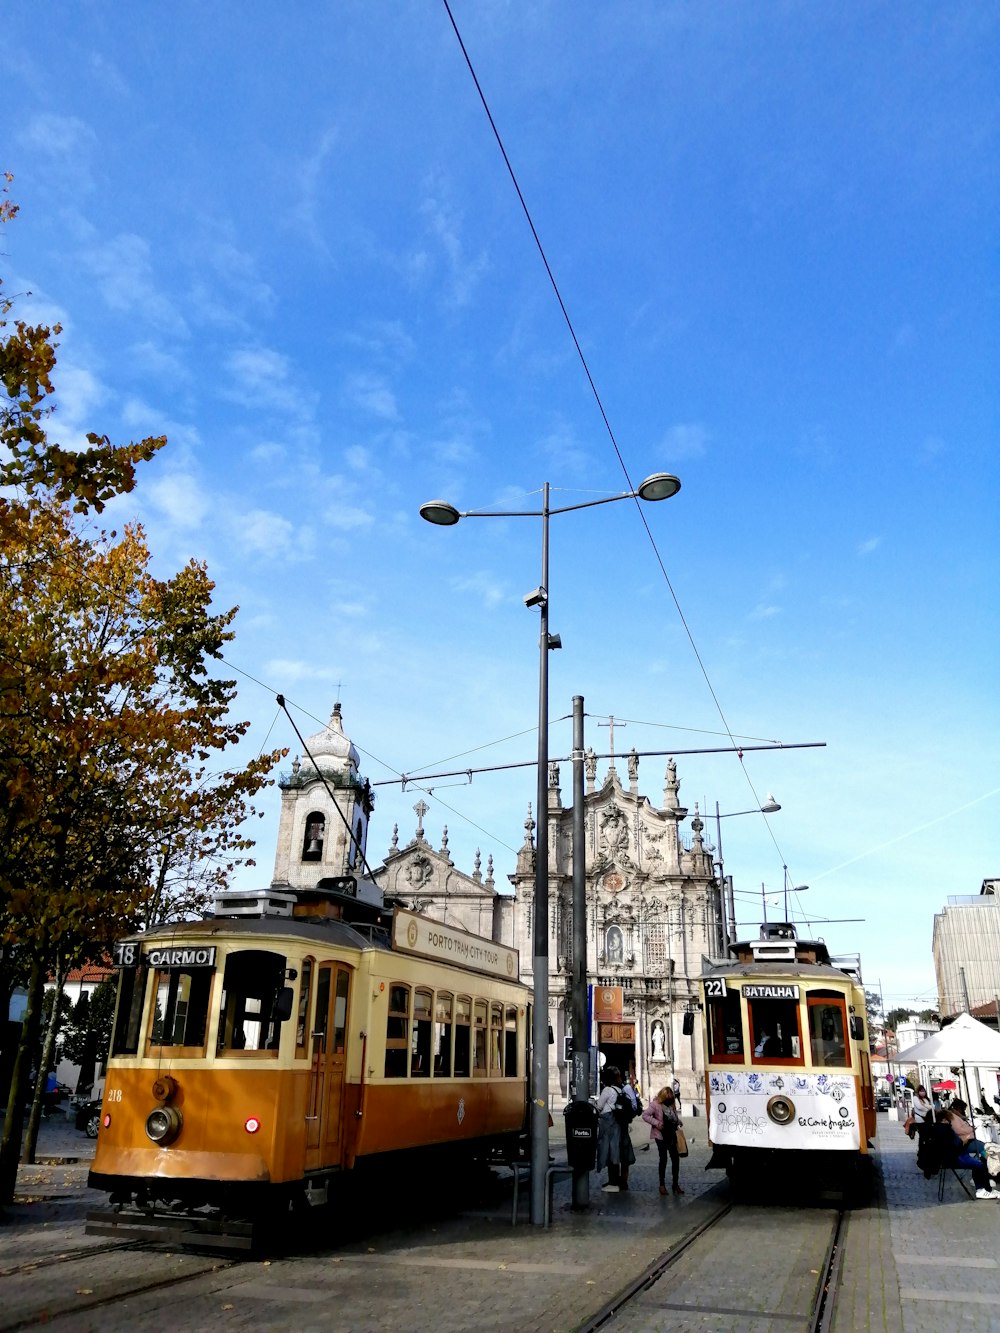 brown and black tram on the street during daytime